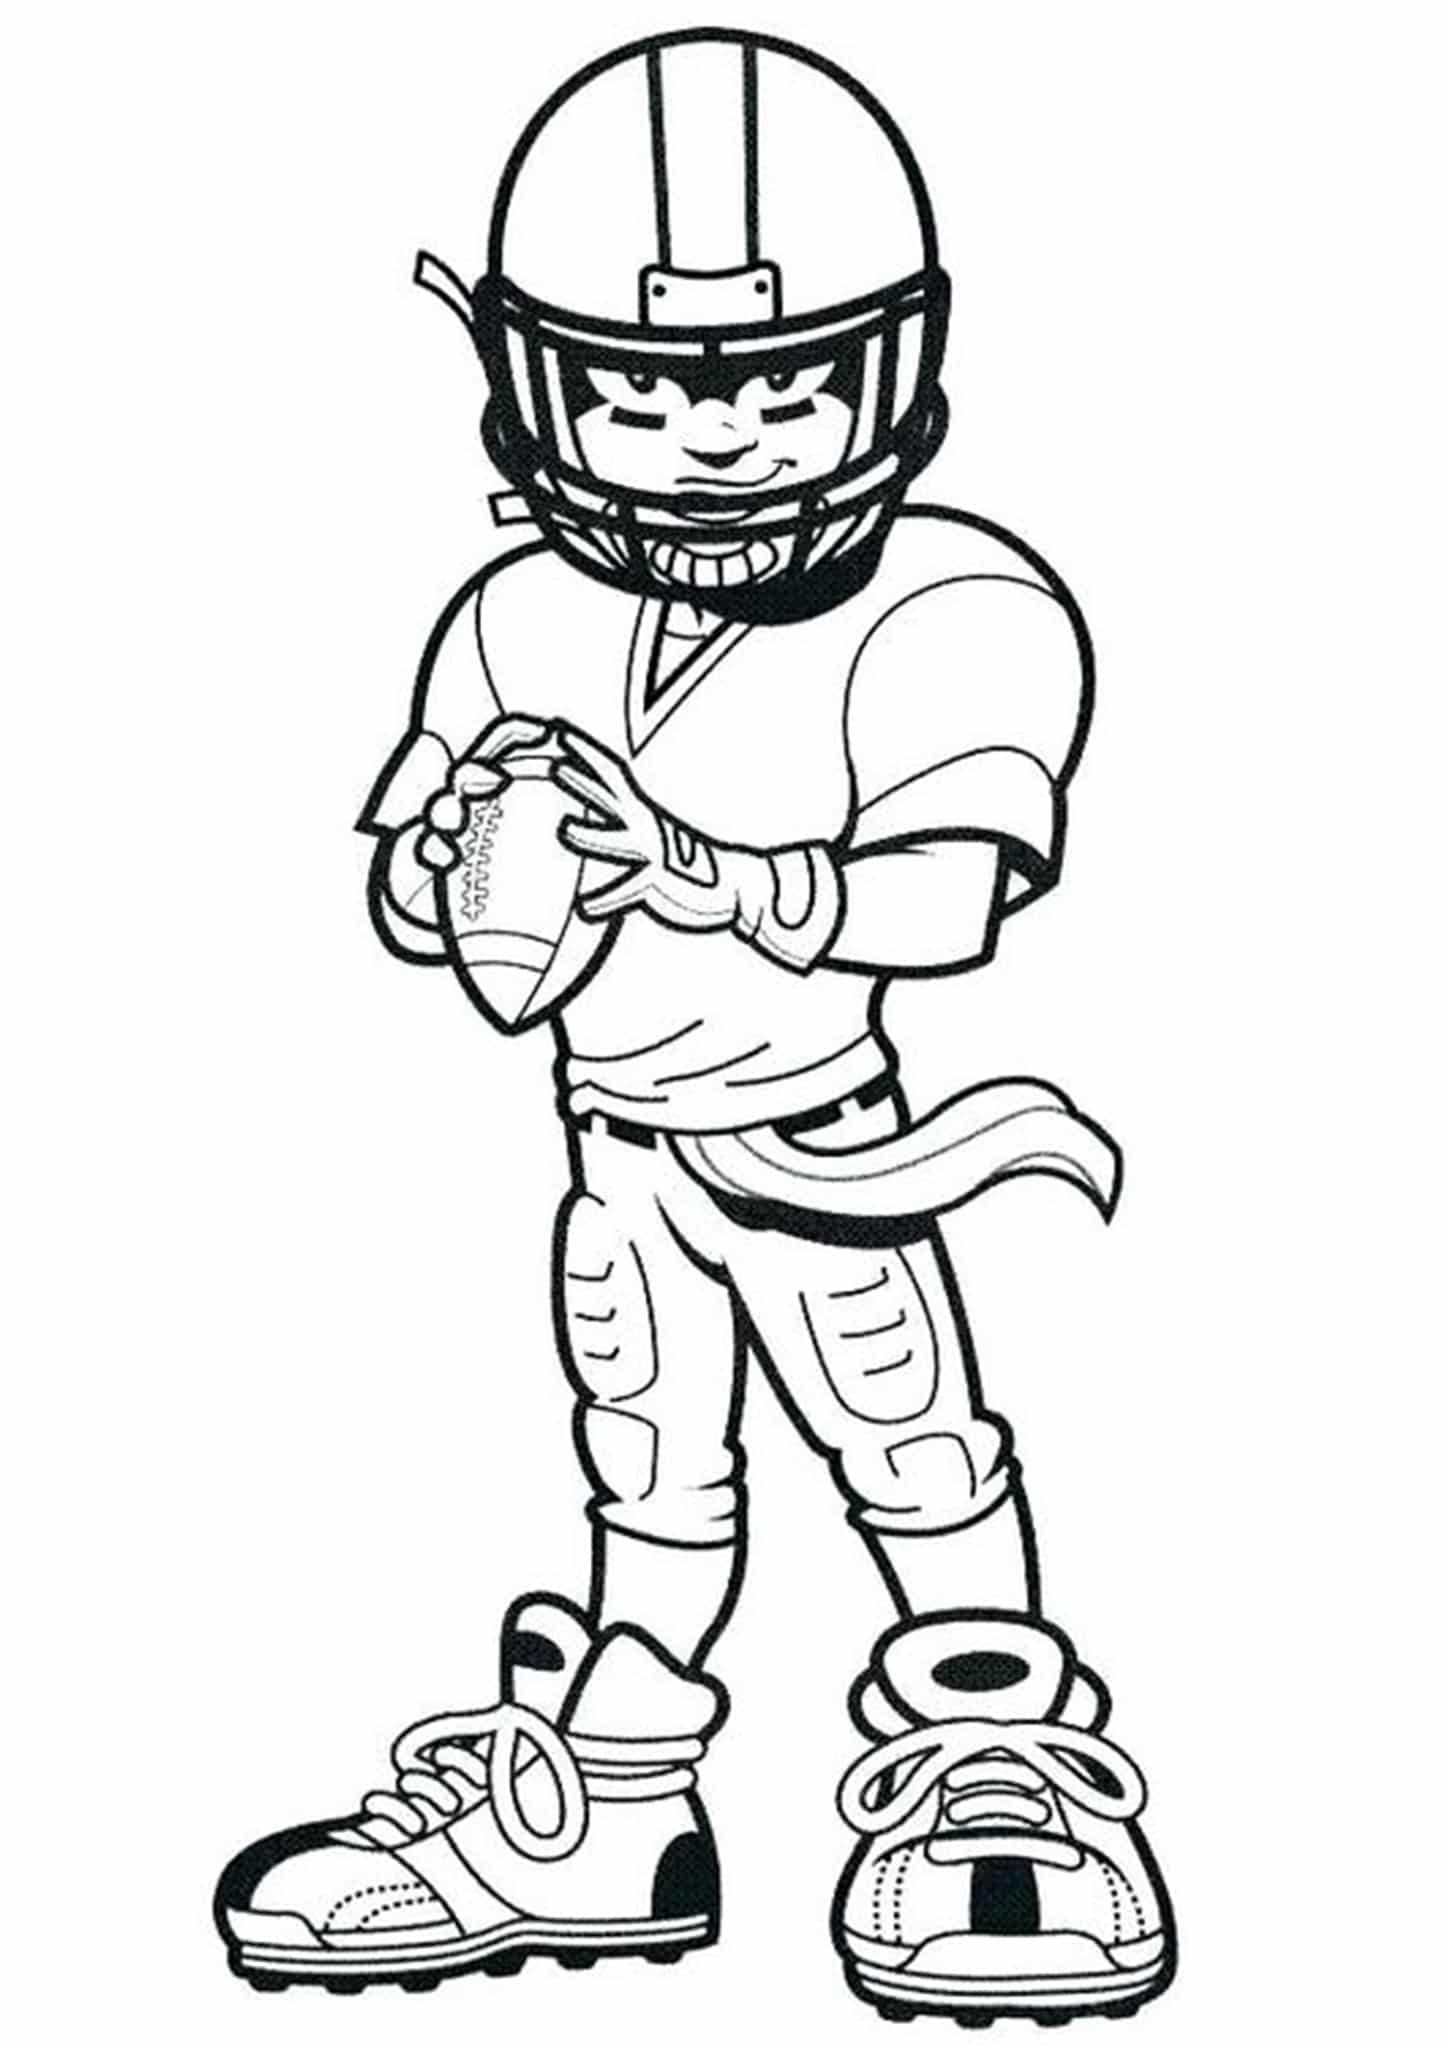 Free & Easy To Print Football Coloring Pages Tulamama